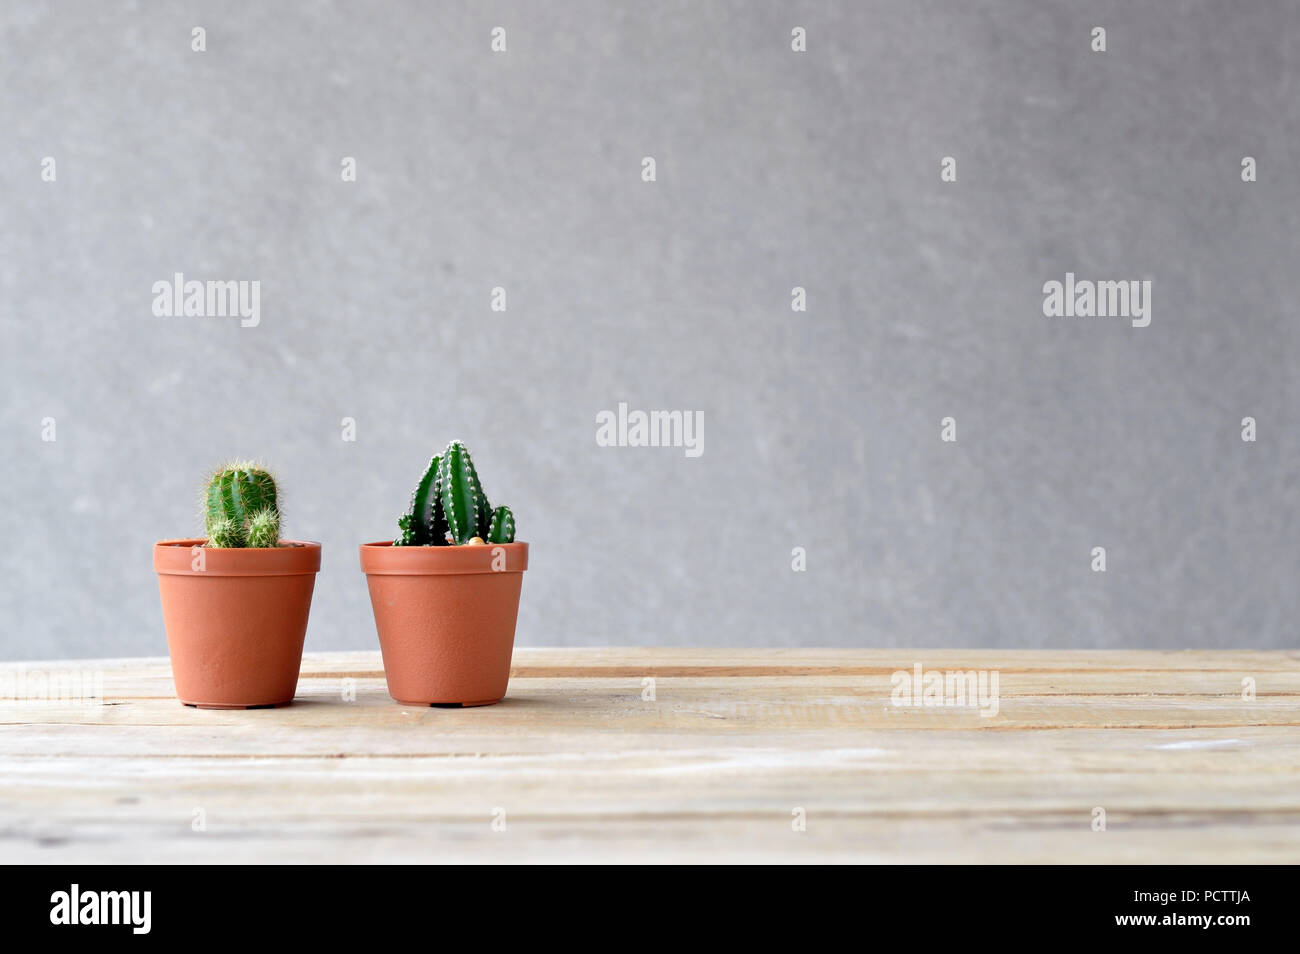 still life natural two cactus on wooden table Stock Photo